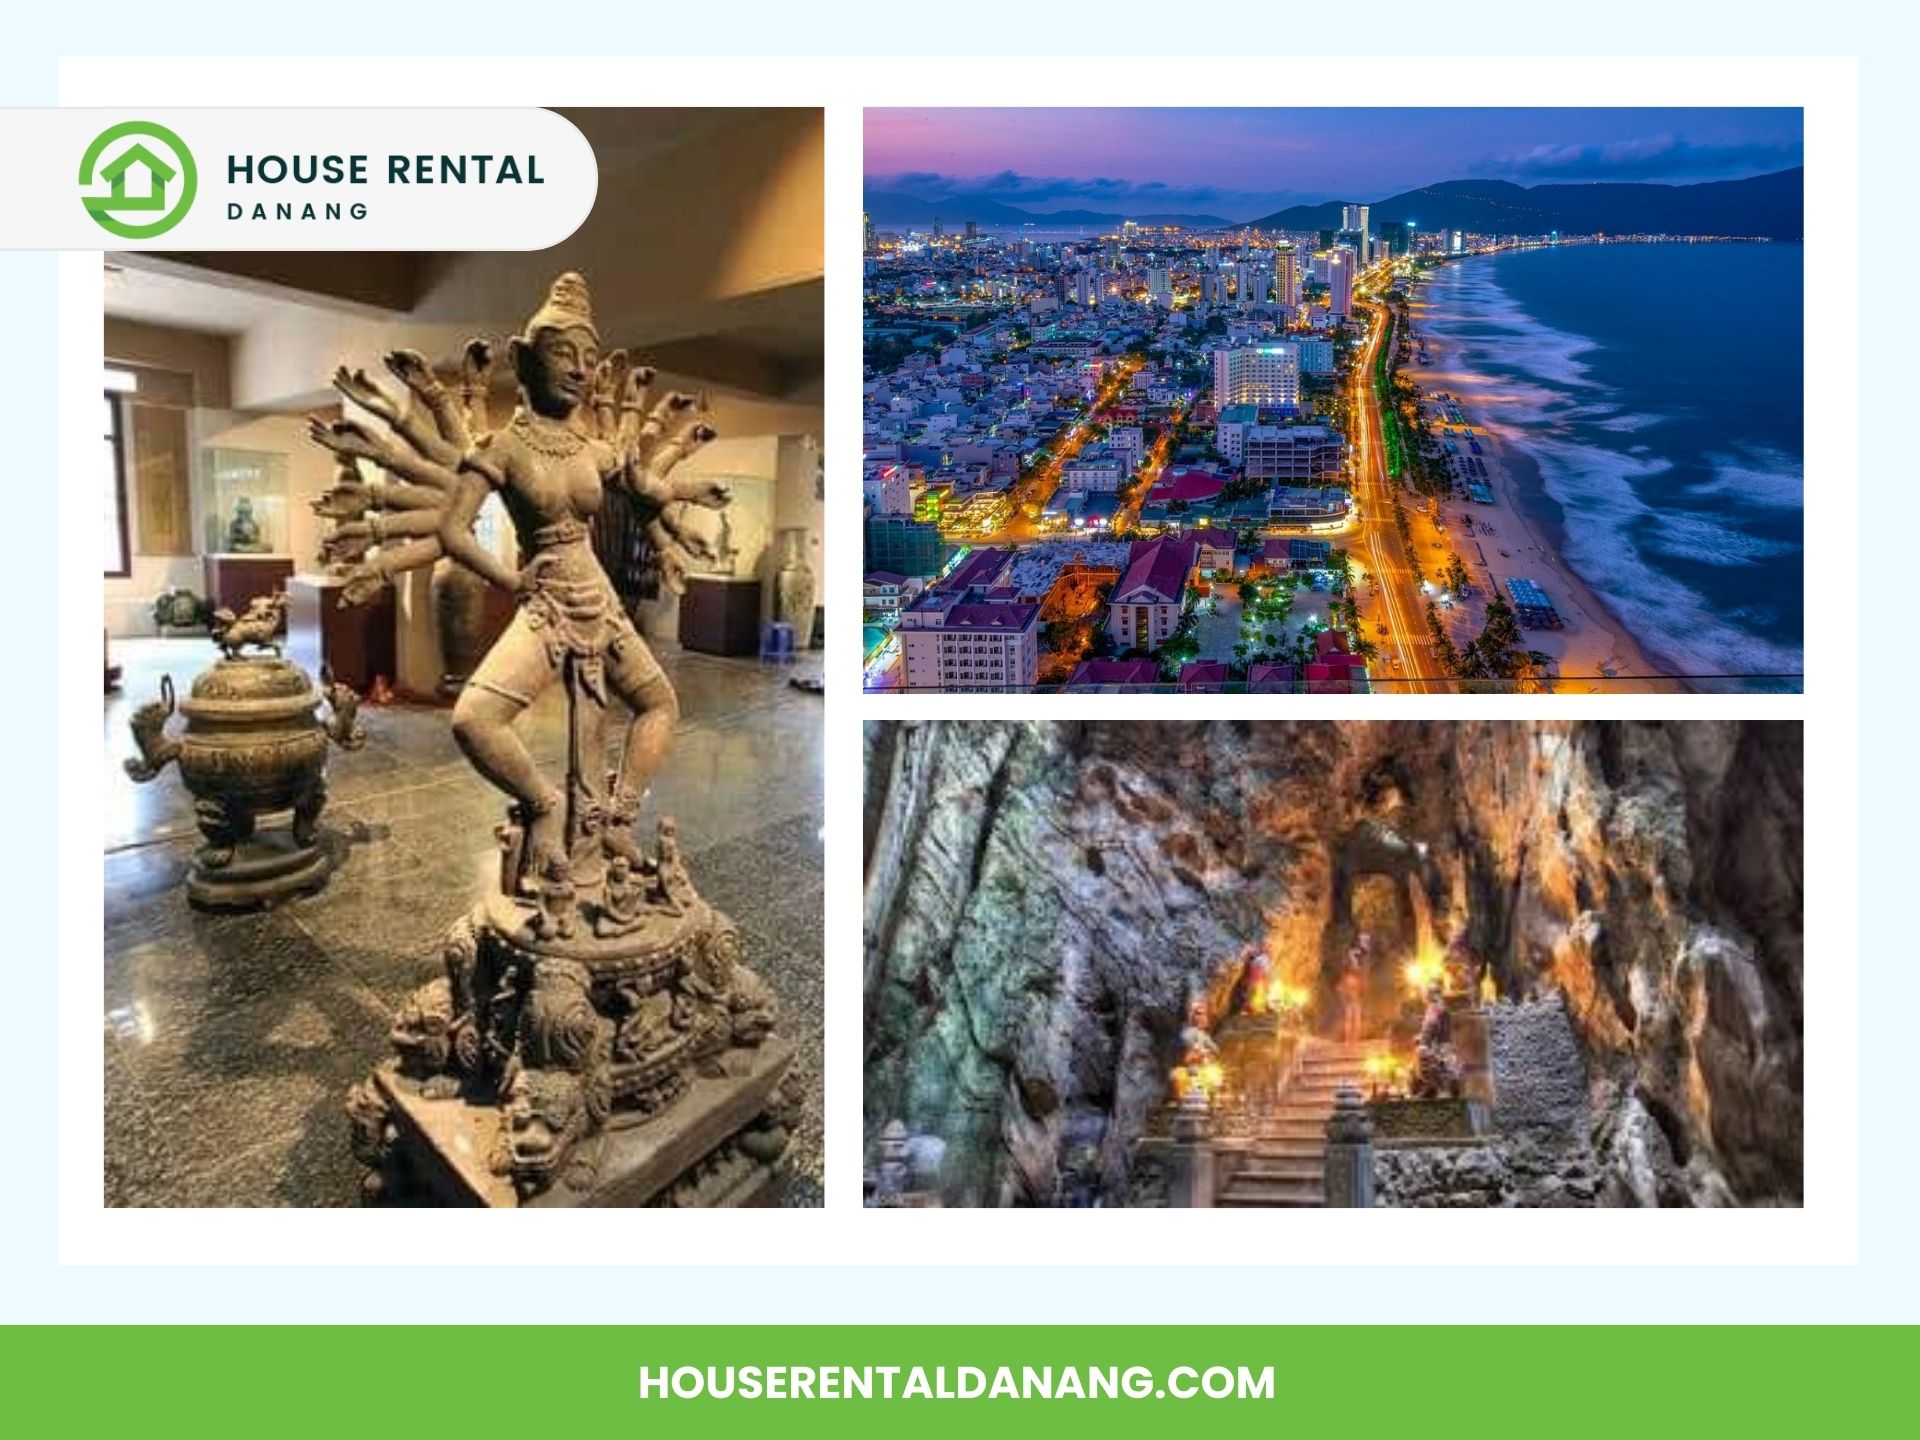 A collage featuring a house rental logo, a beach cityscape at night, the Han River Bridge illuminated beautifully, a multi-armed statue in a room, and a lit stone staircase inside a cave. Text reads 'HOUSERENTALDANANG.COM'.